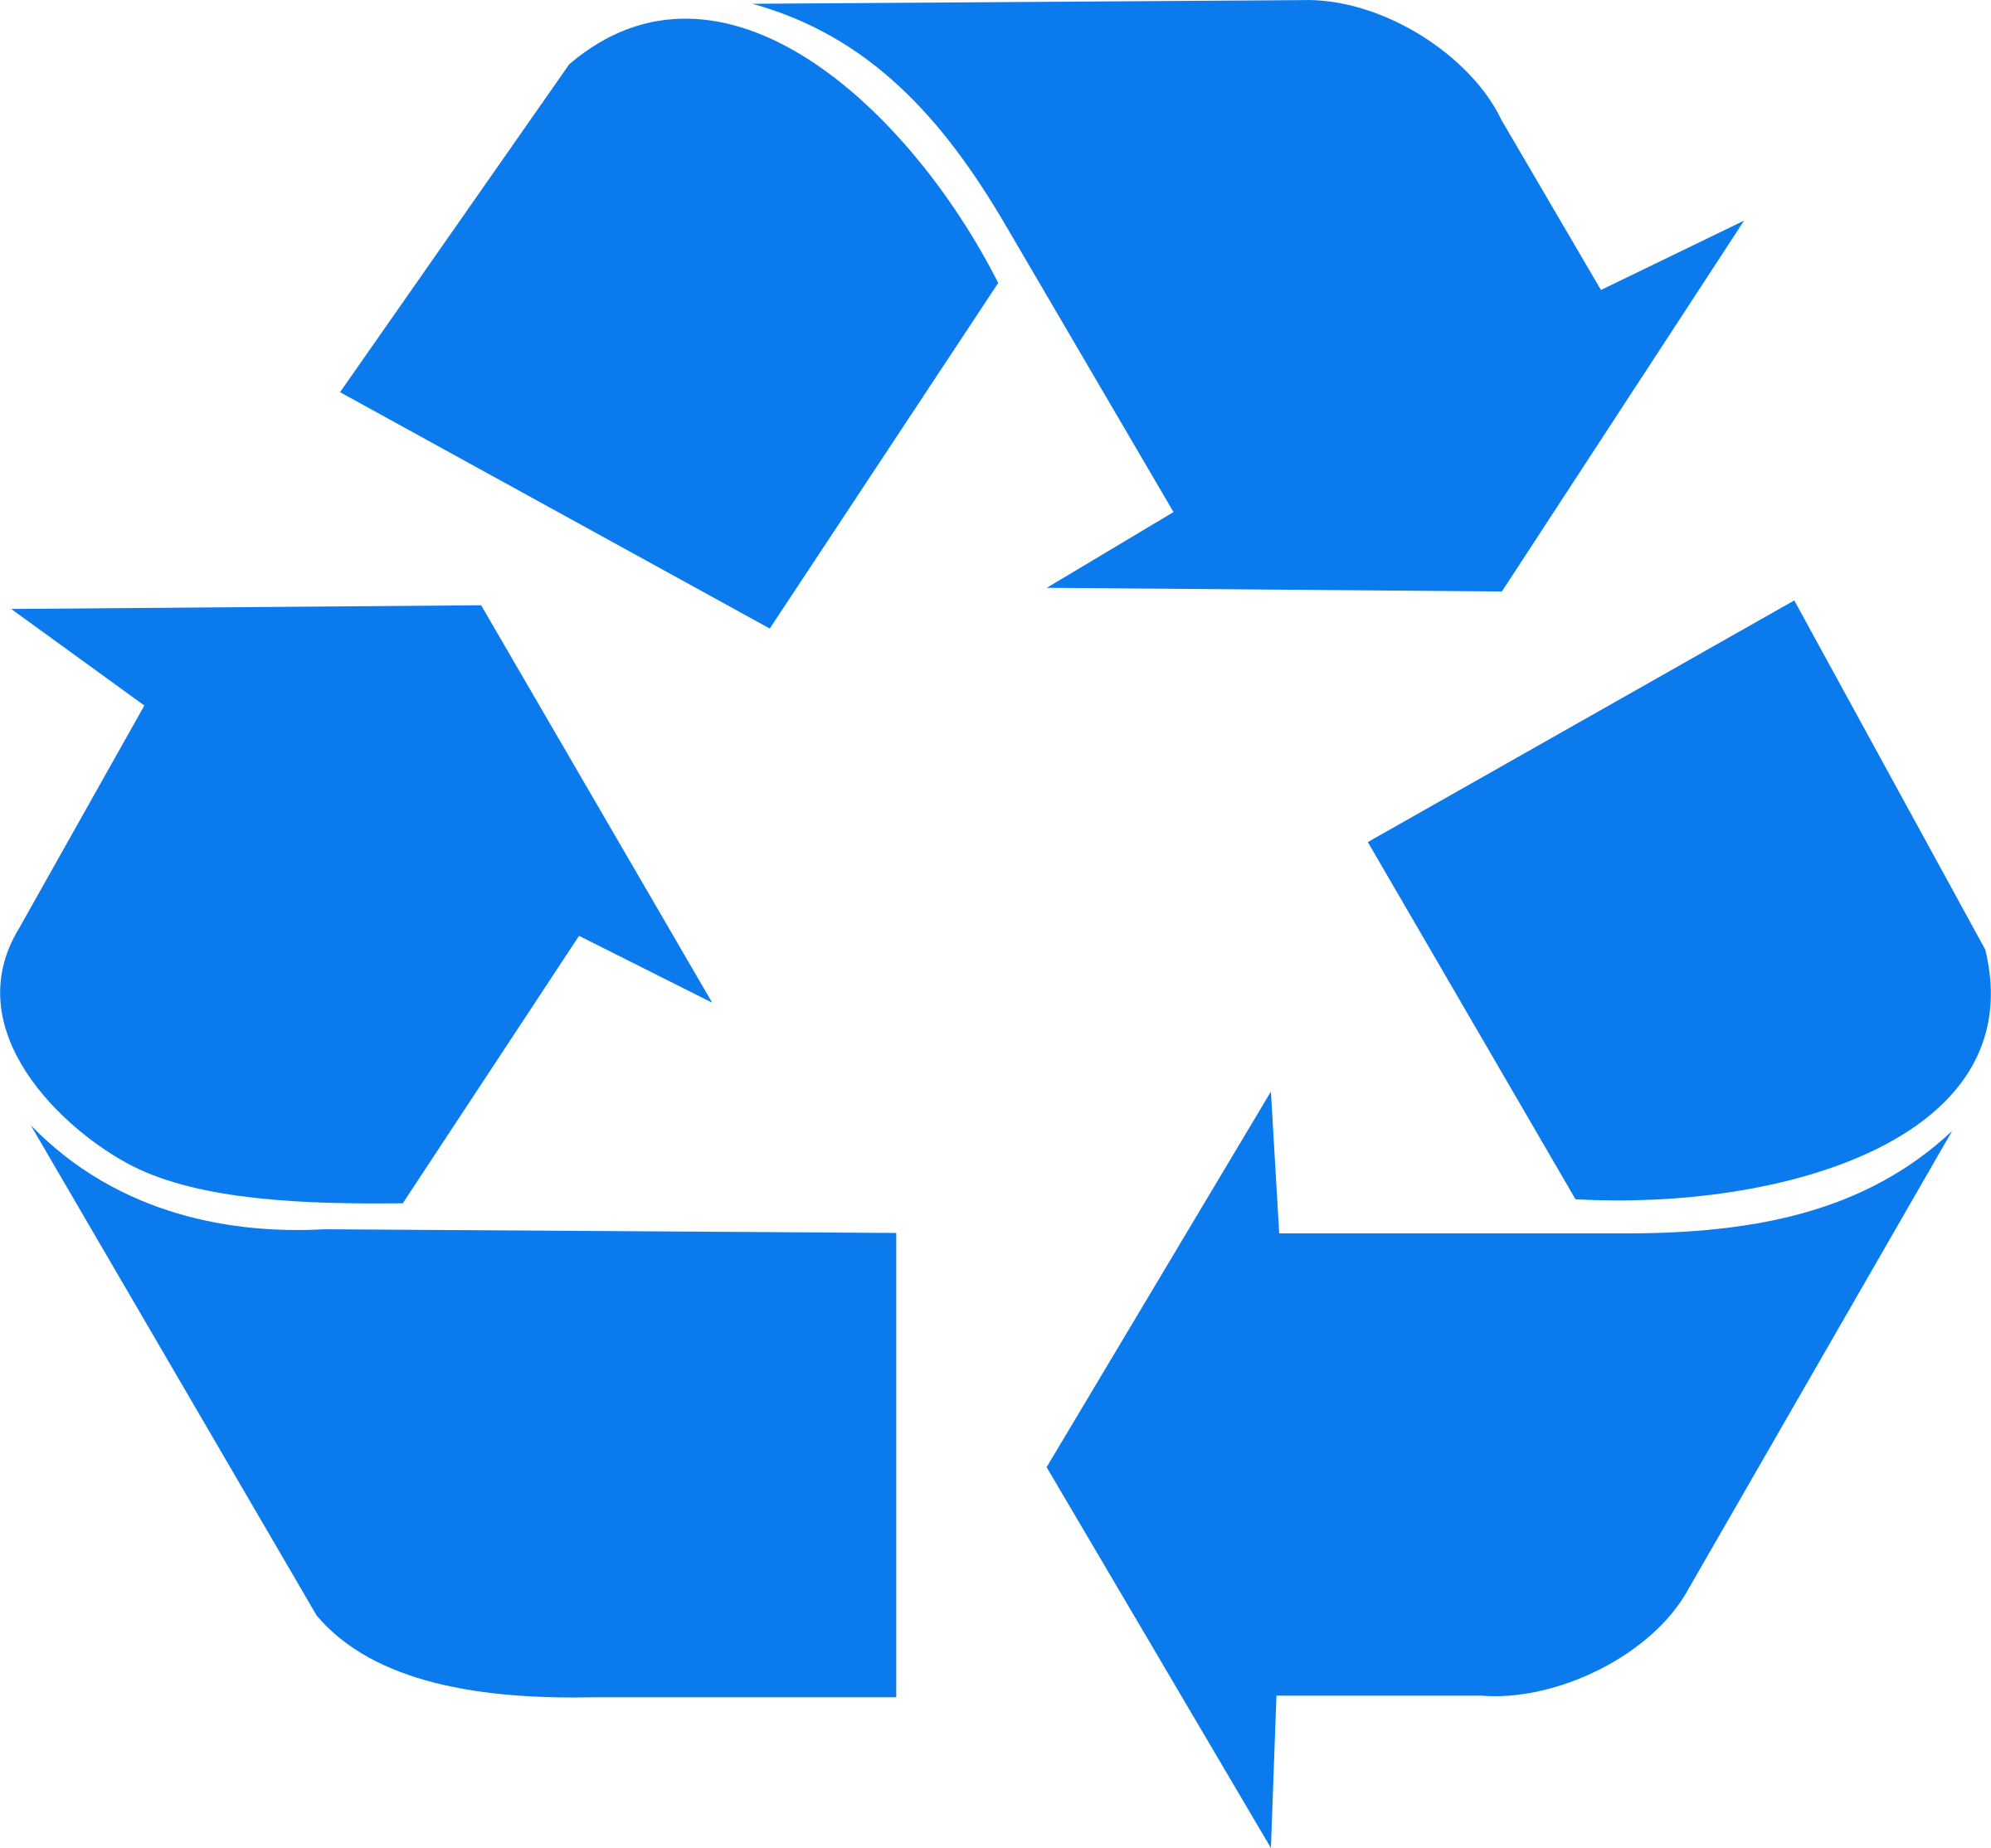 recycle, business icon, recycling png background full hd 1080p